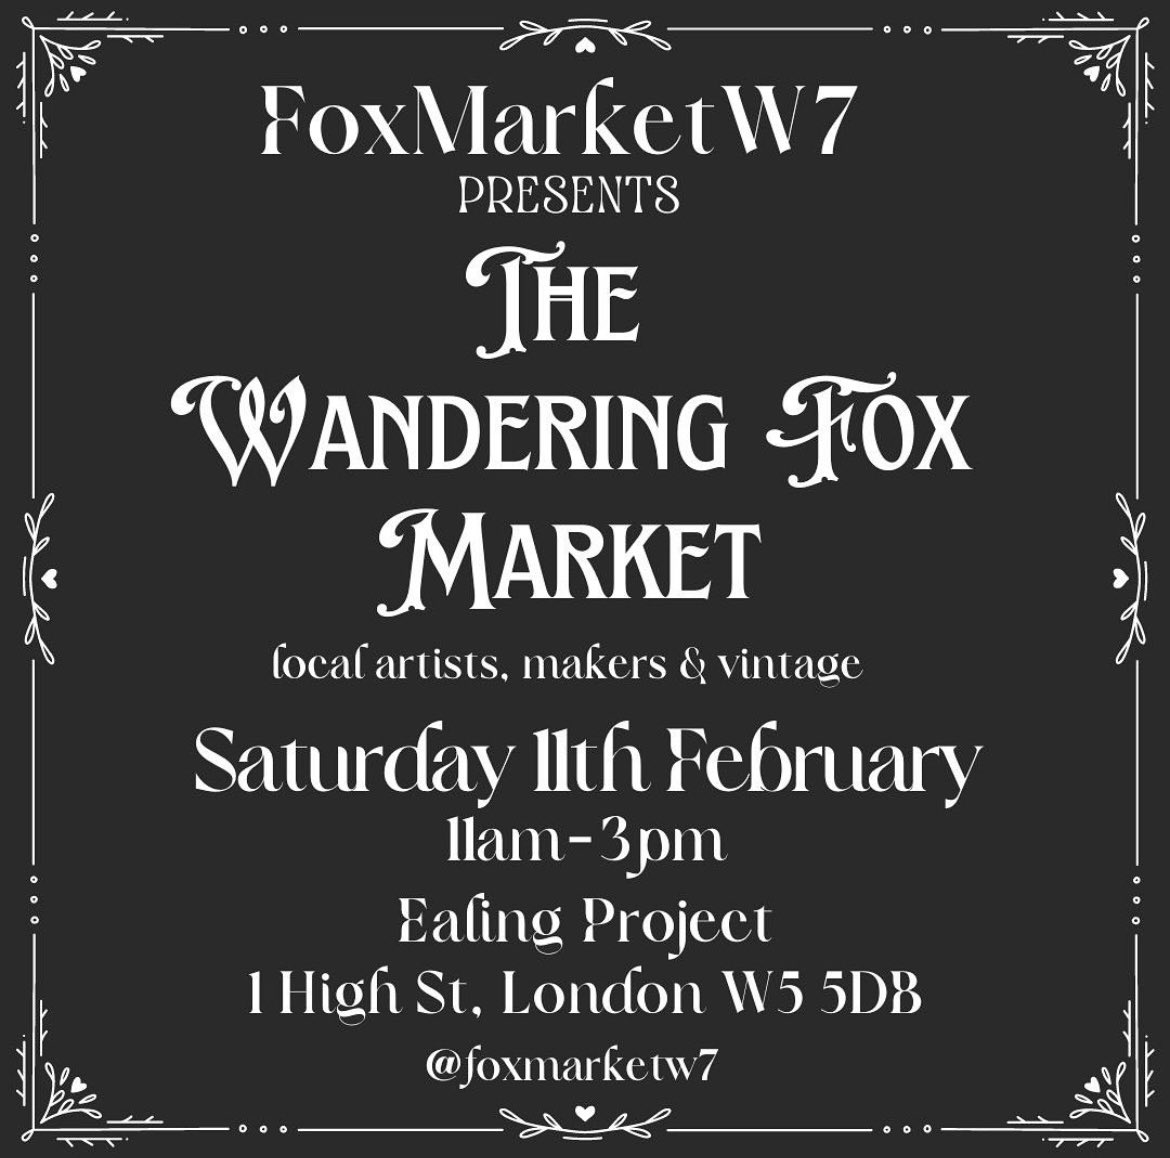 #NorwoodGreen & #Southall residents - The Wandering Fox 🦊 Market comes to #EalingBroadway today (Saturday) where you’ll find a number of local independent artists, makers & vintage traders in the basement area of @ealing_project 
Why not pop along 
& #shoplocal this weekend